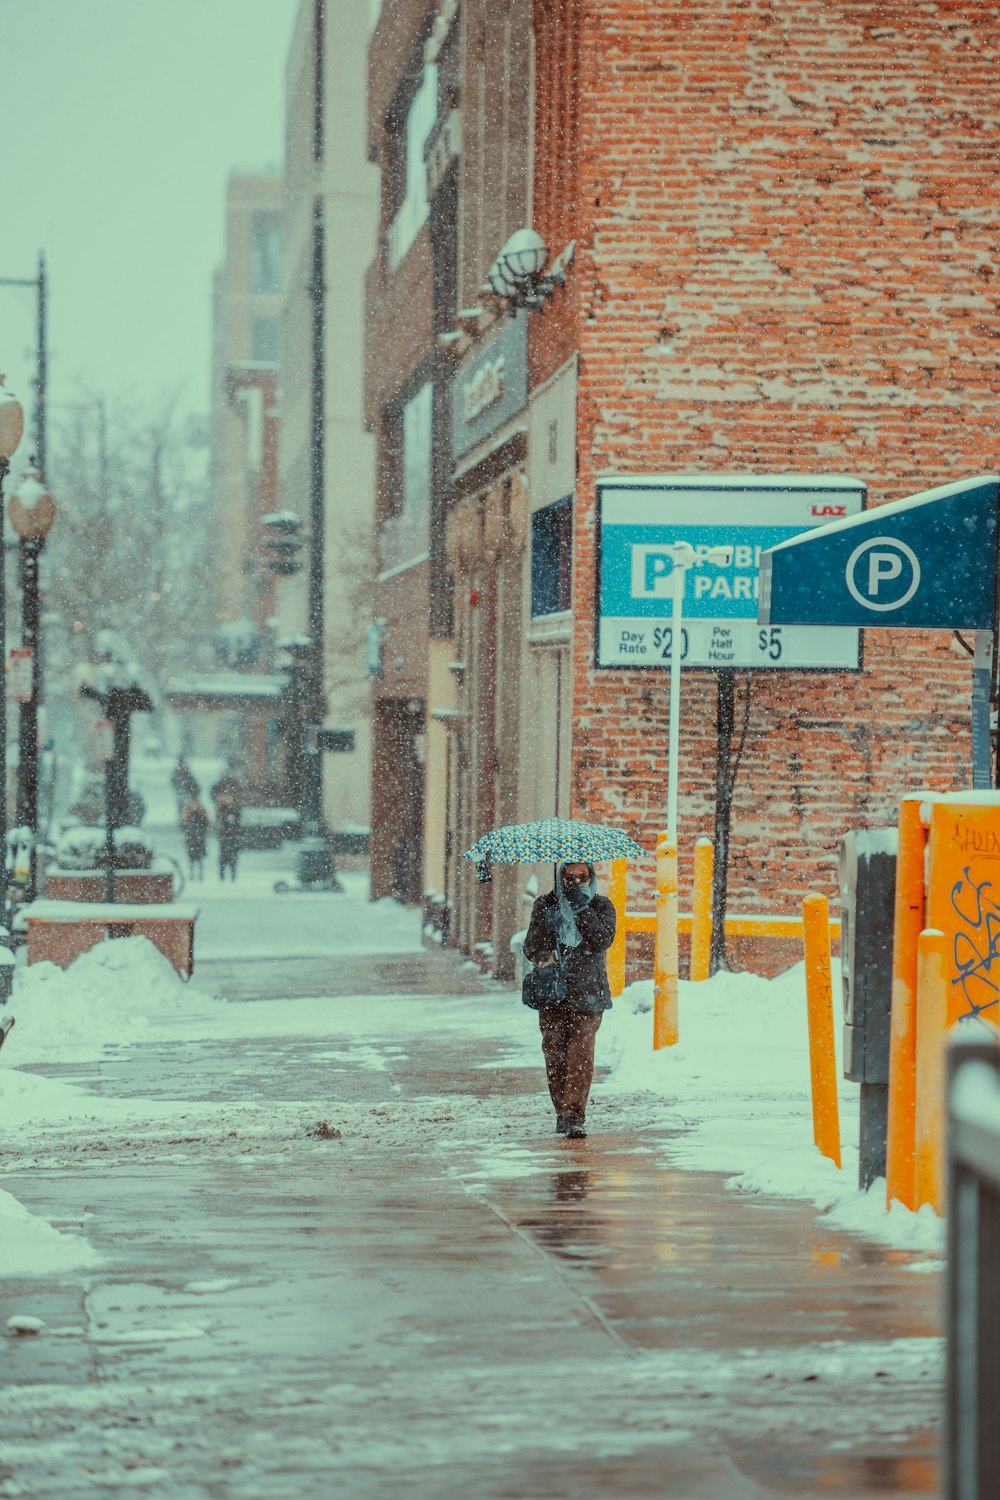 a person walking down a snow covered street holding an umbrella